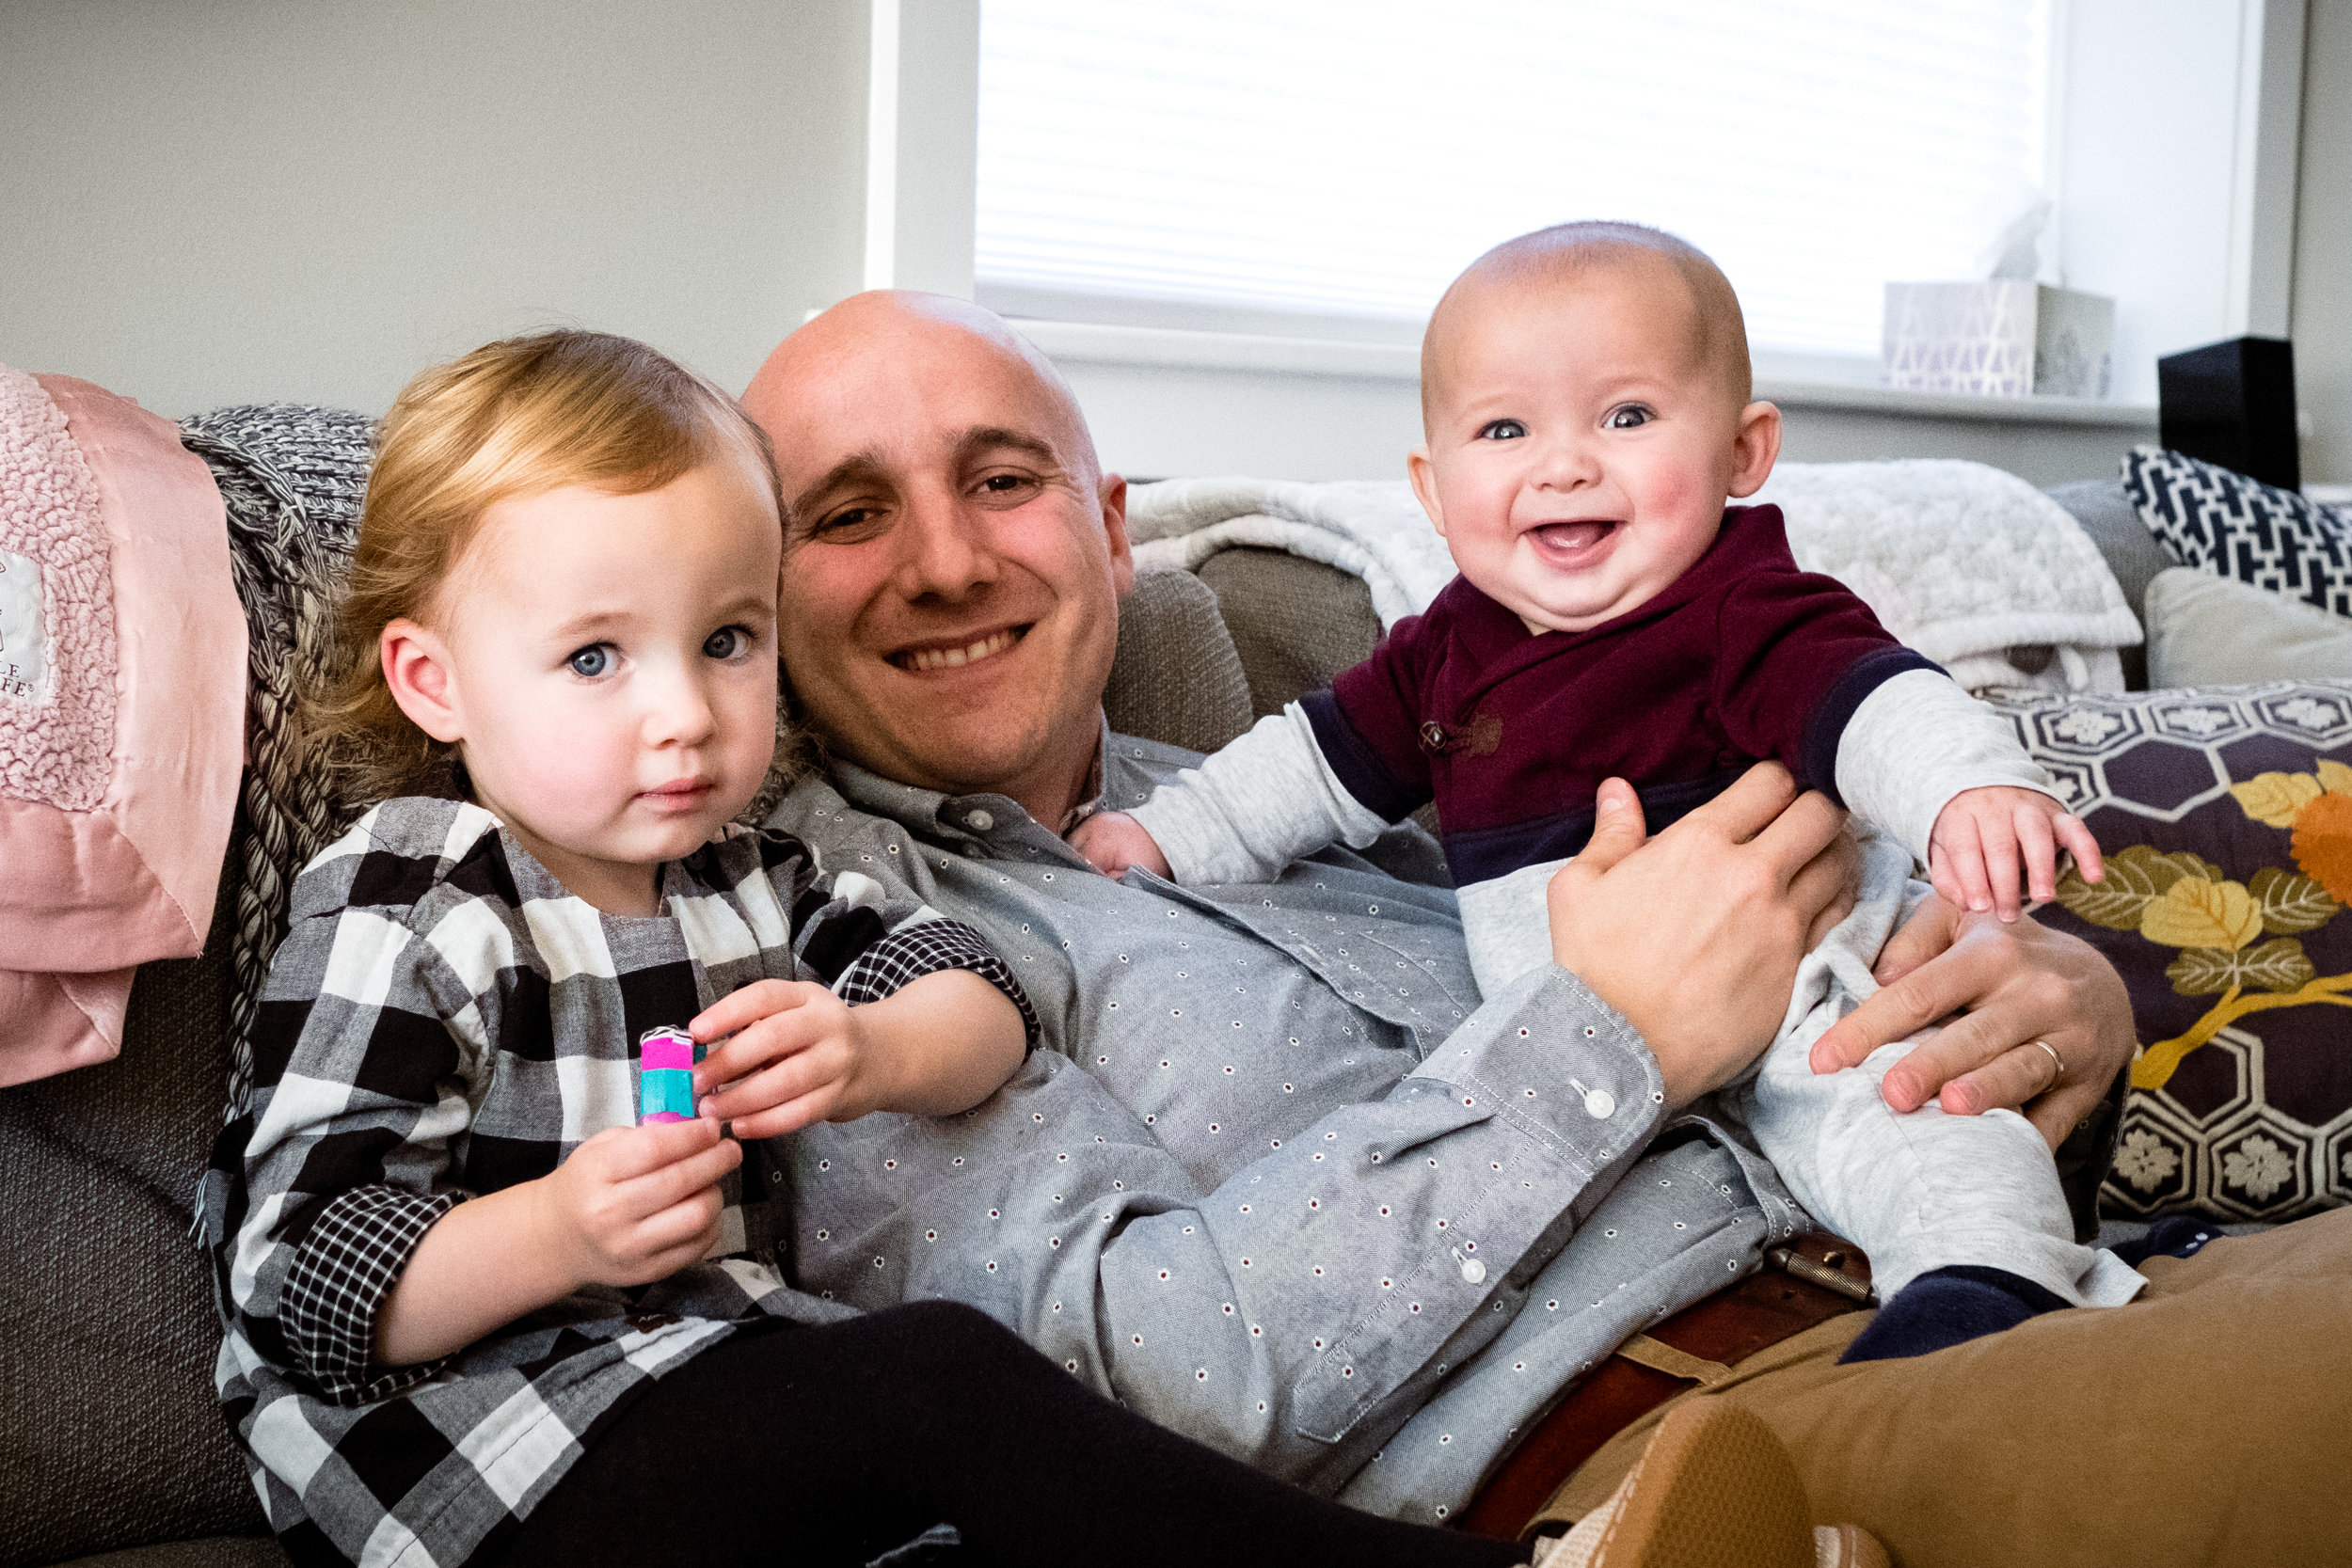 Father with young daughter and infant son smiling on sofa in their home.